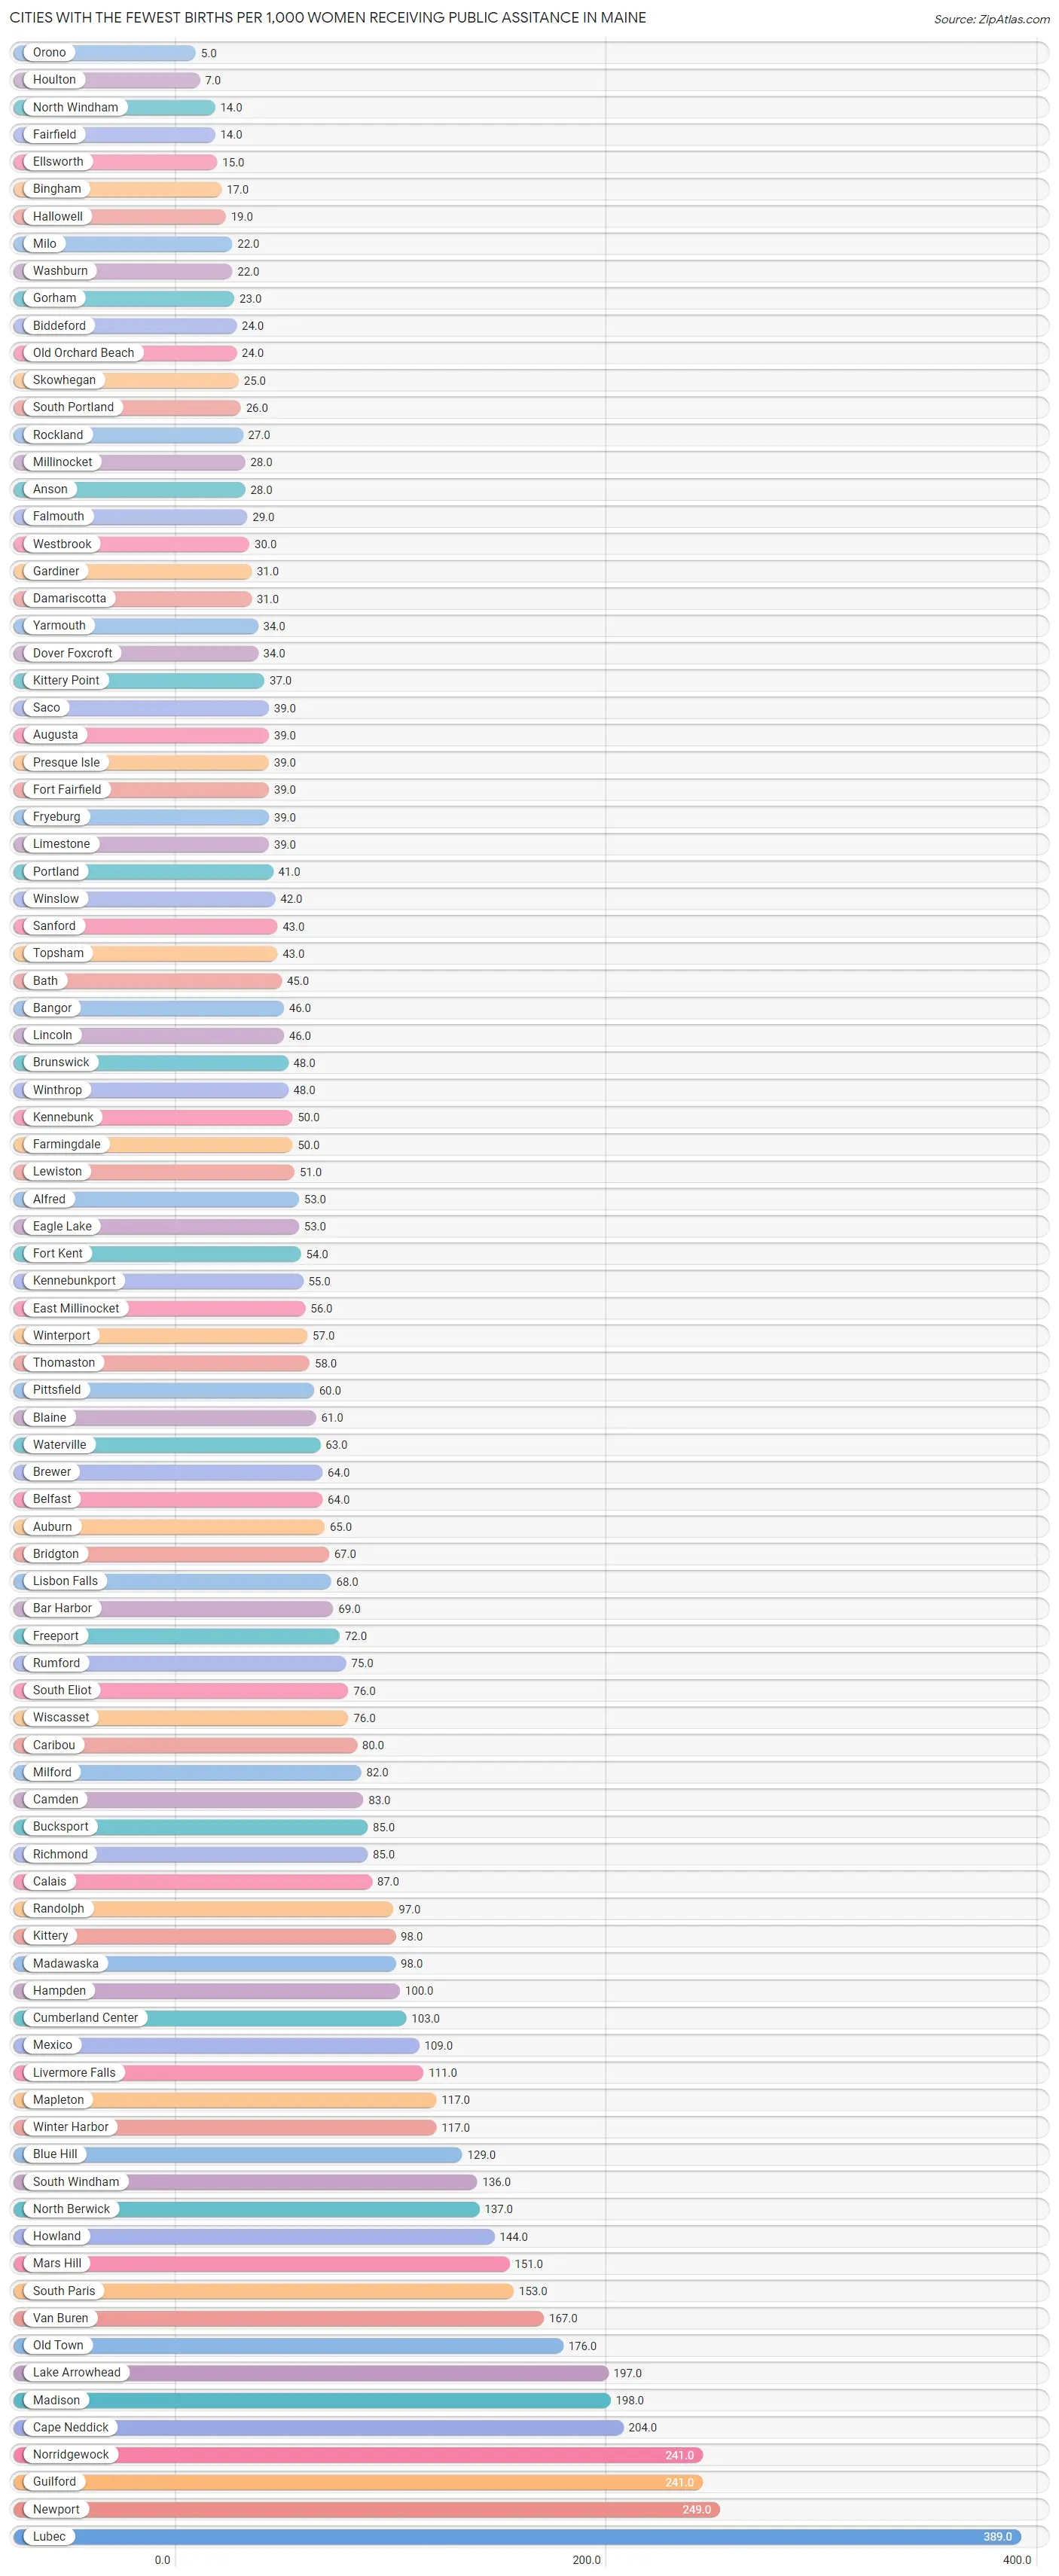 Cities with the Fewest Births per 1,000 Women Receiving Public Assitance in Maine Chart